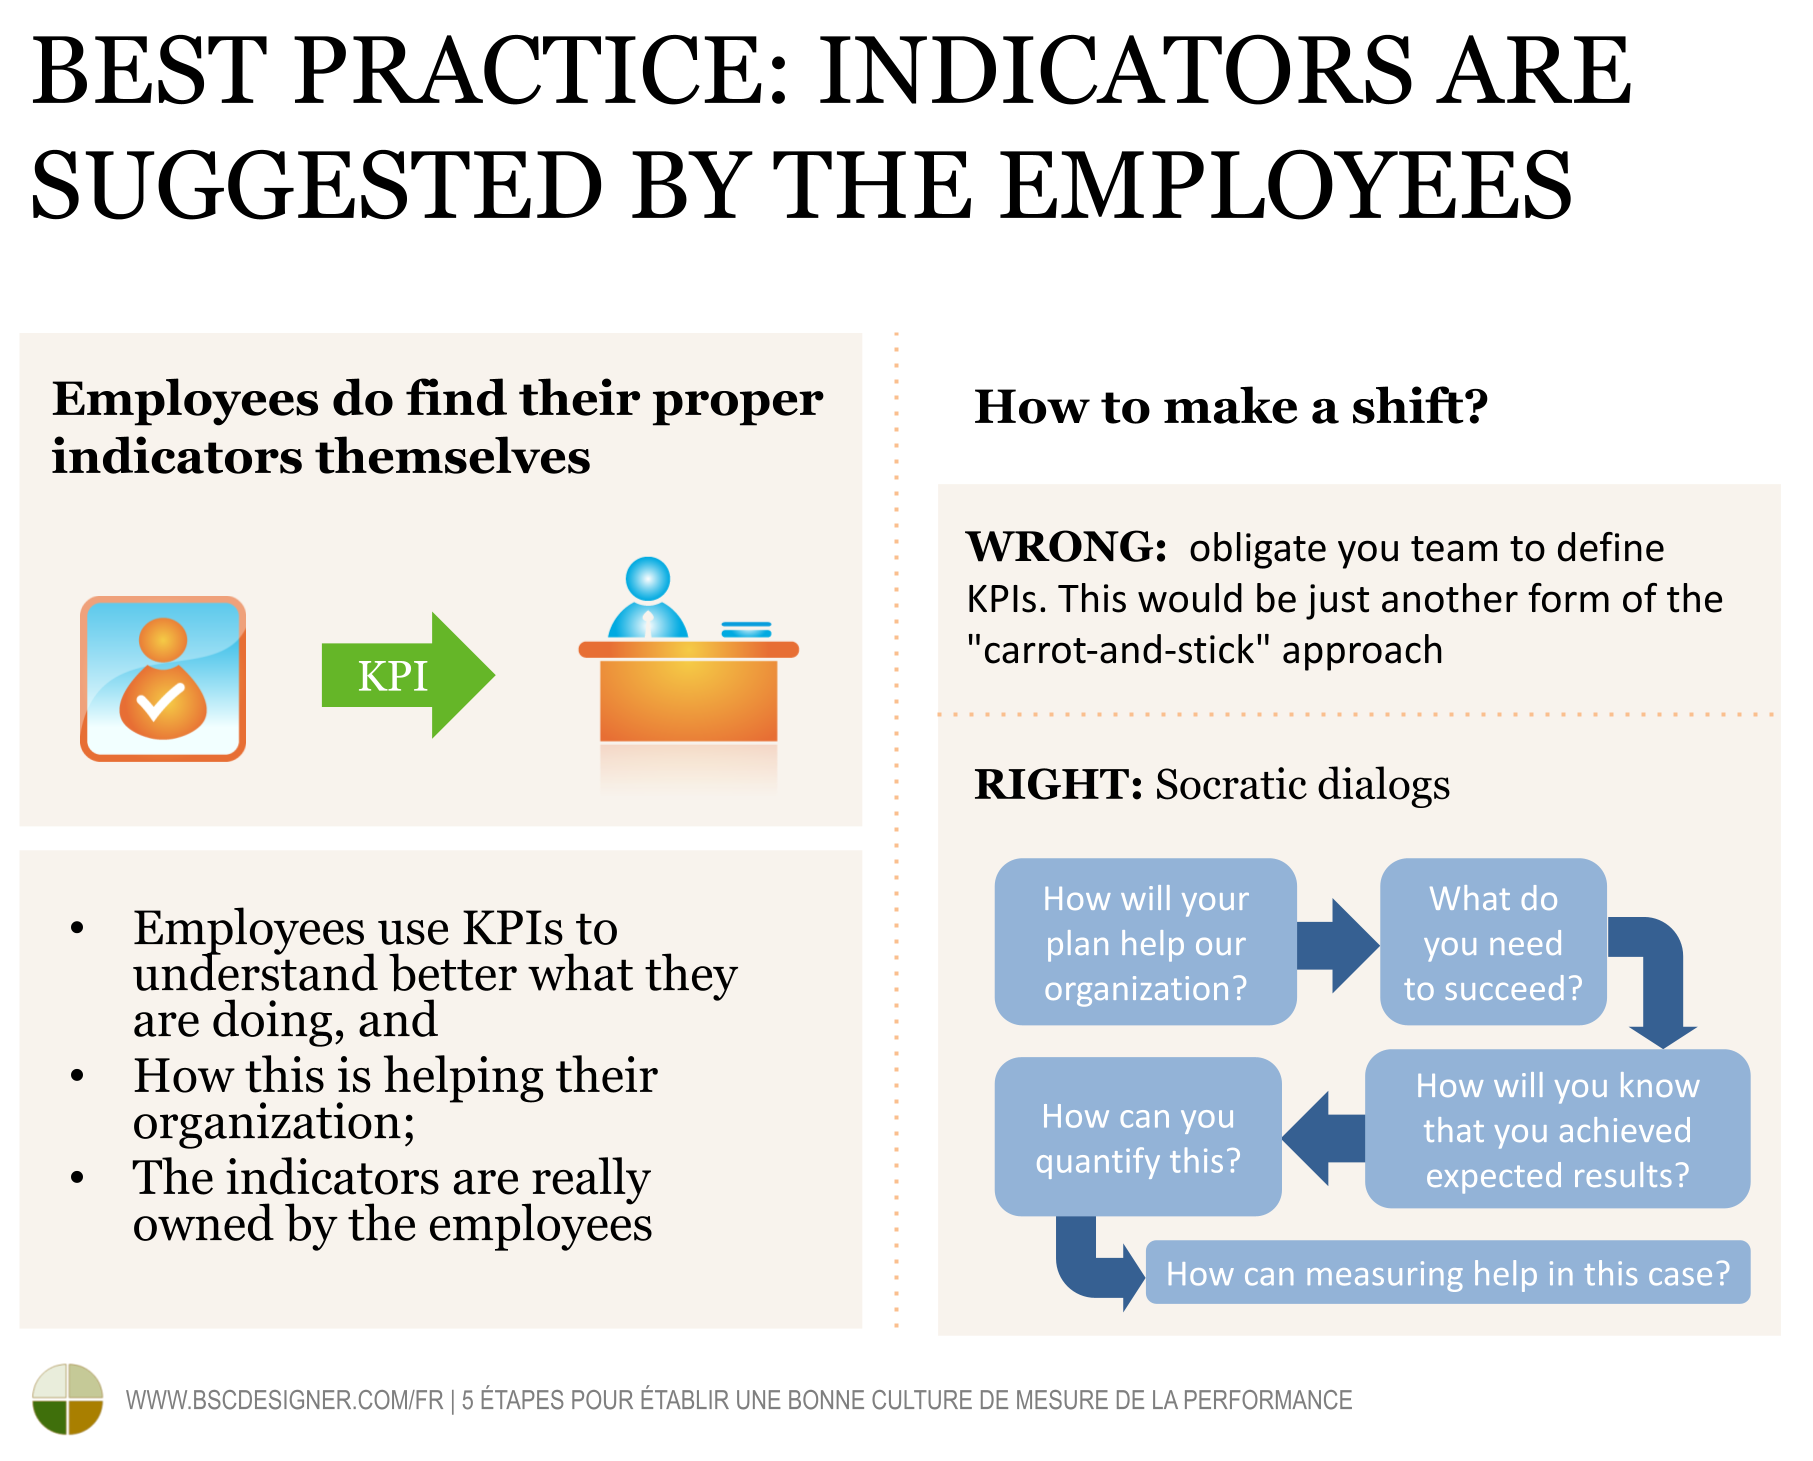 How to make a cultural shift from carrot and stick management style? The best practice is when KPIs are suggested by the employees.